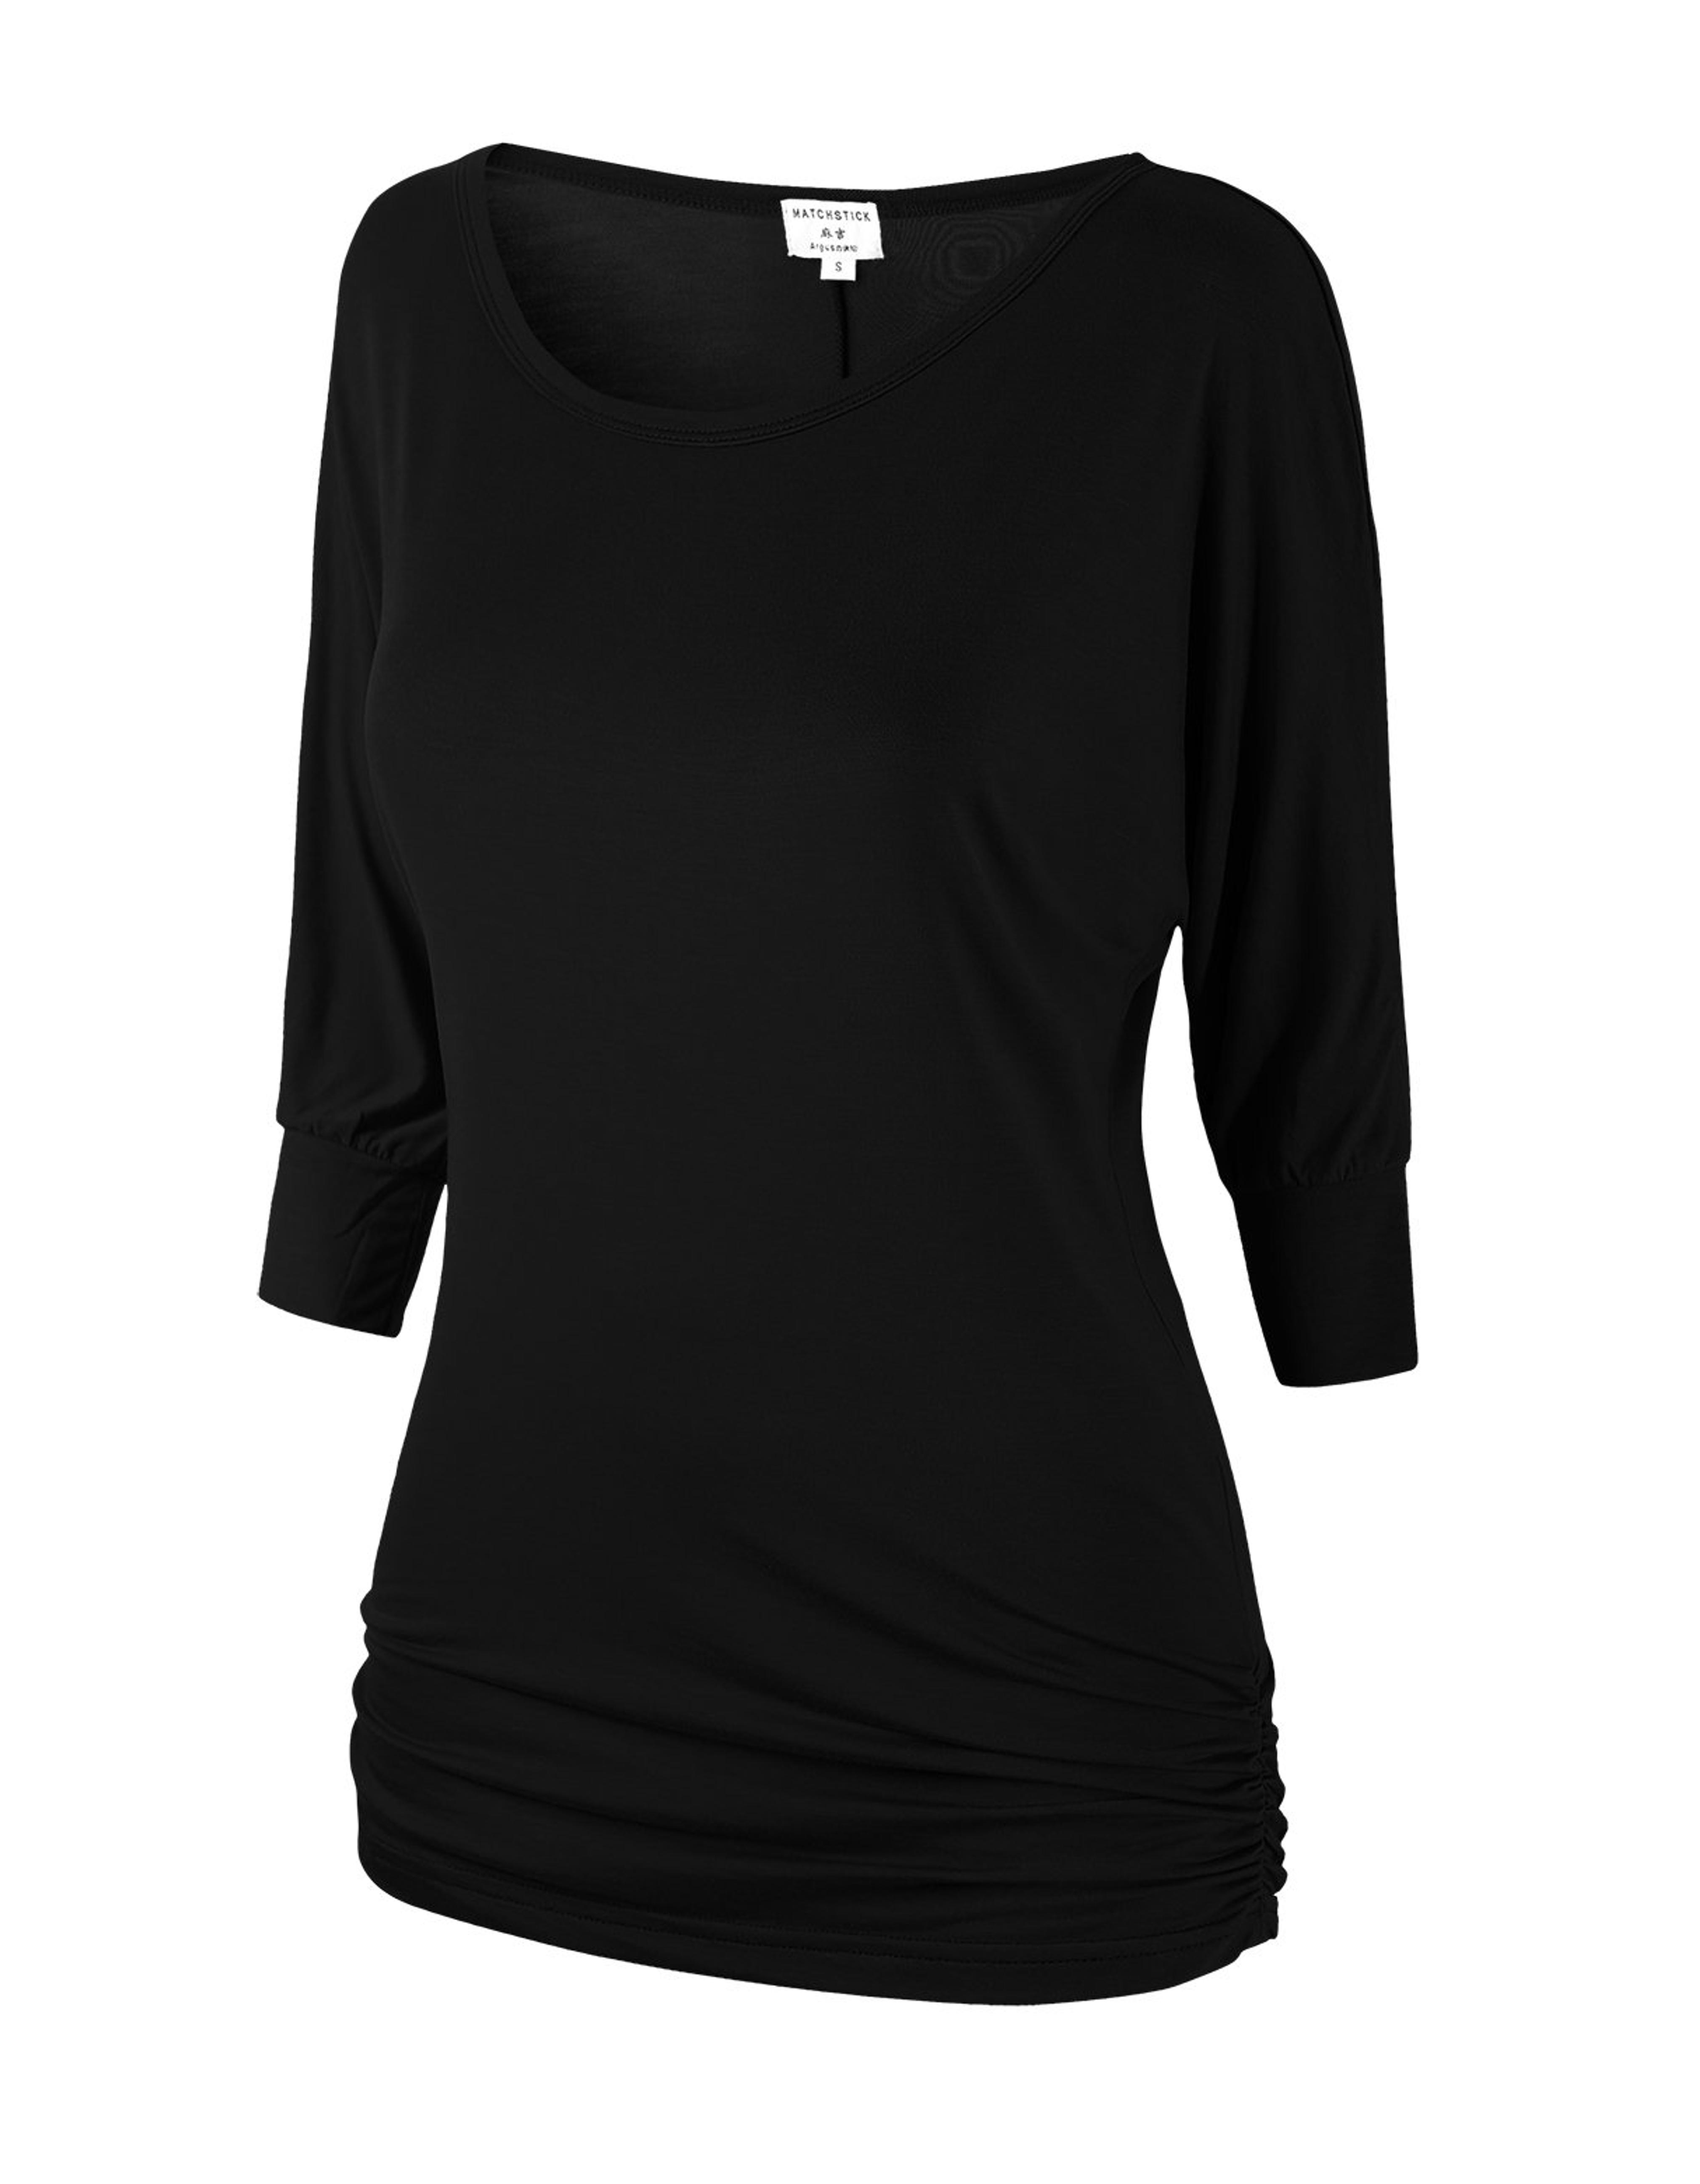 Match Women's 3/4 Sleeve Drape Top with Side Shirring (140 Black,XX-Large) at Amazon Women’s Clothing store